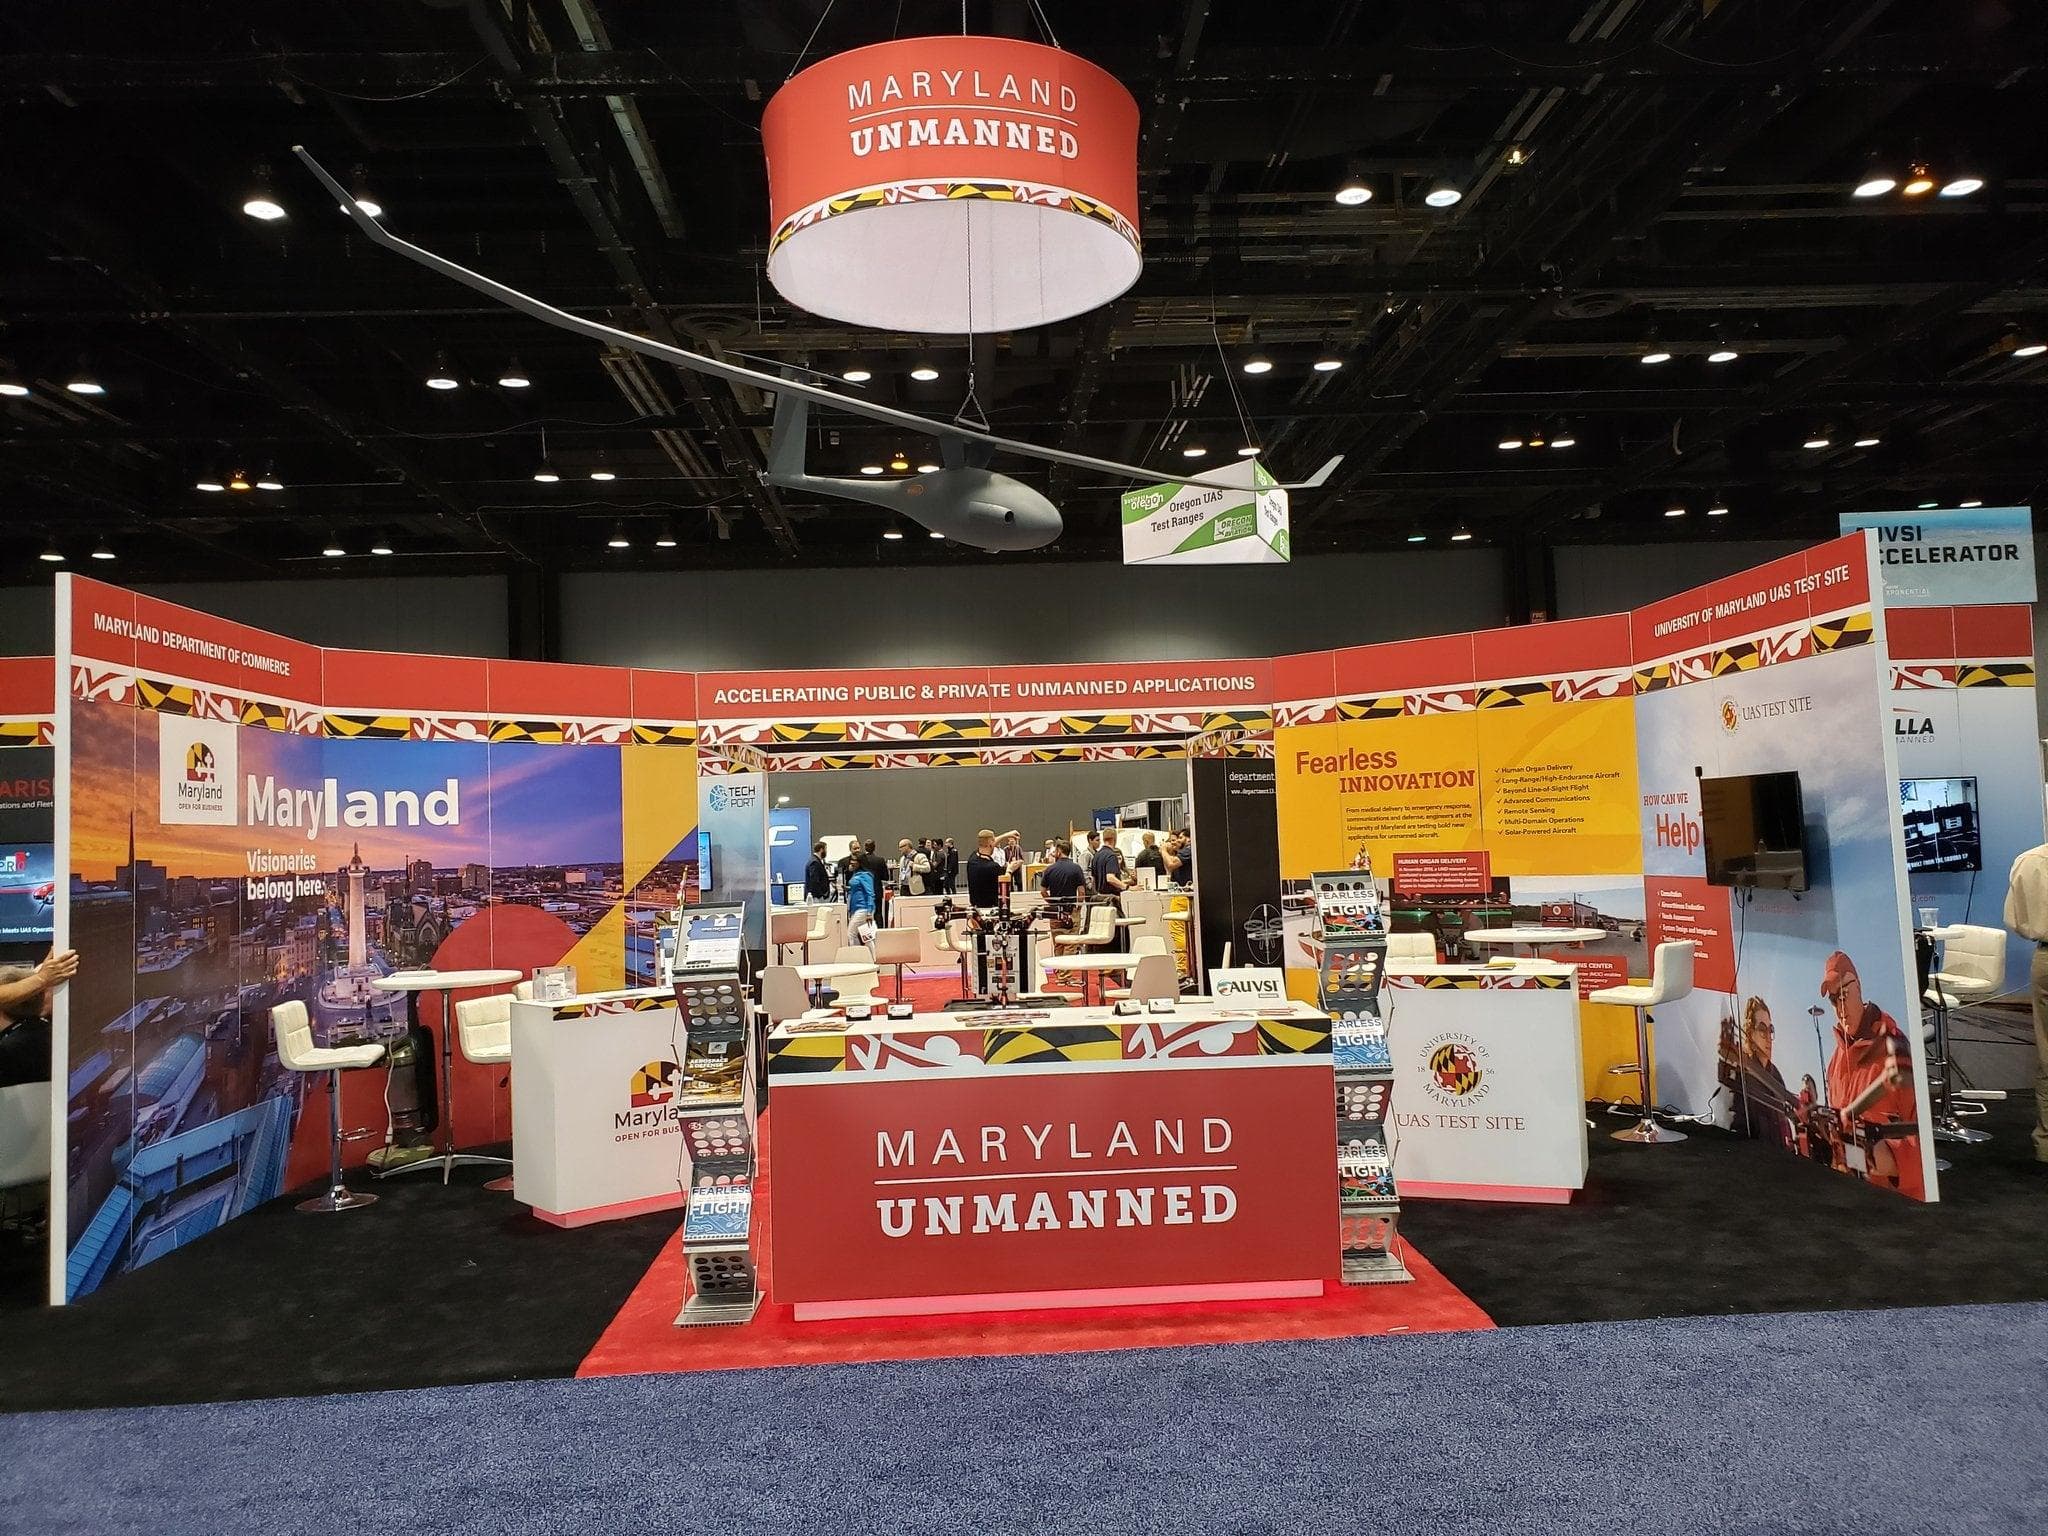 Maryland Unmanned booth during a convention